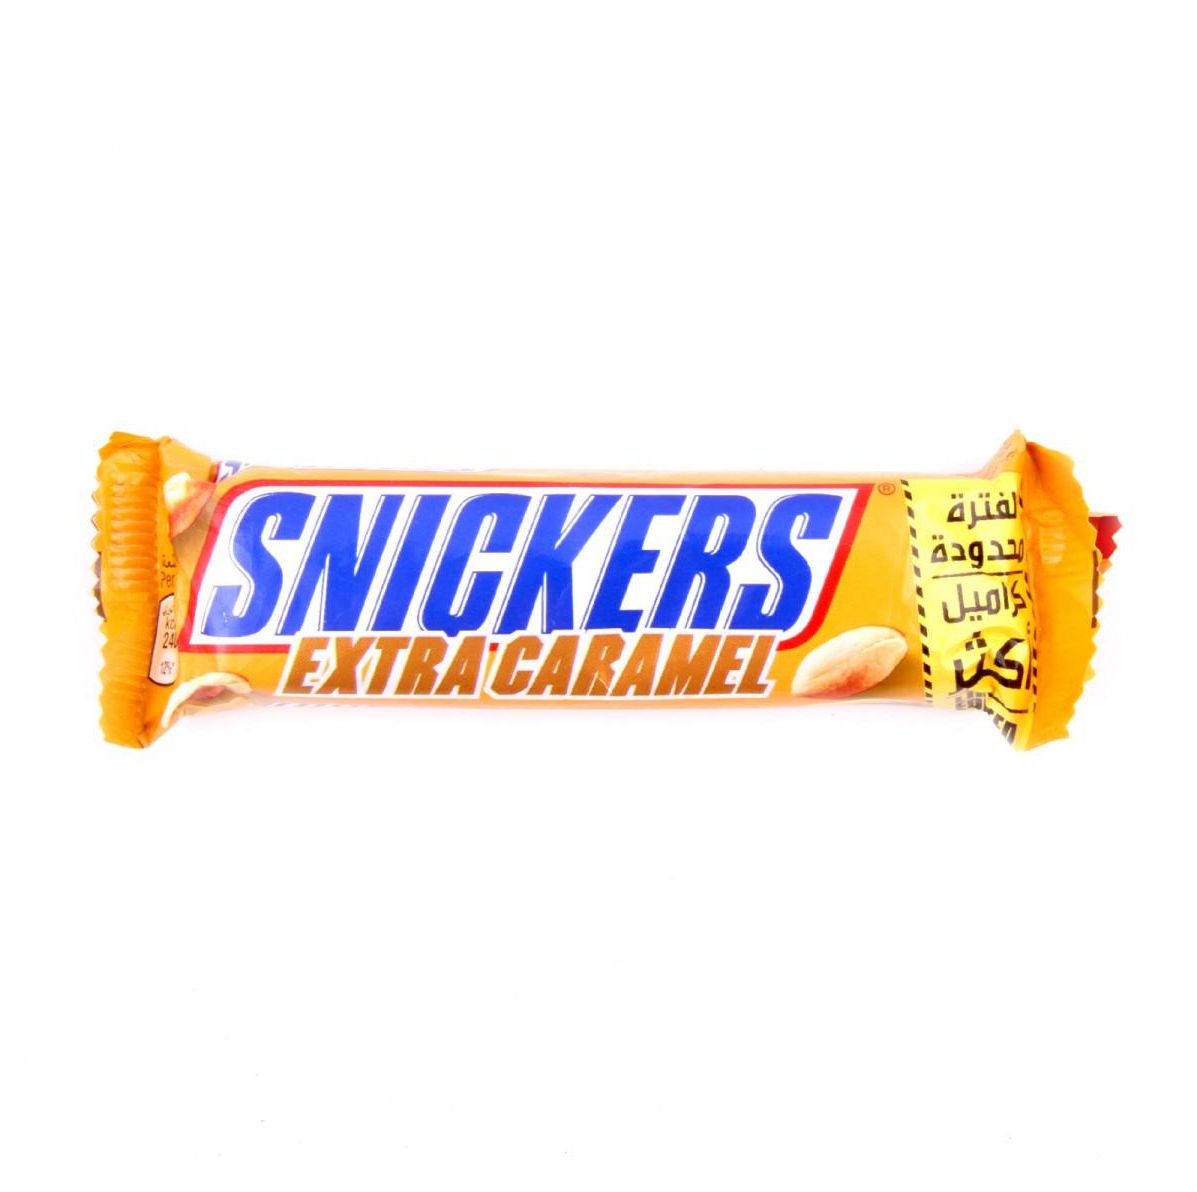 Snickers Extra Caramel 47g